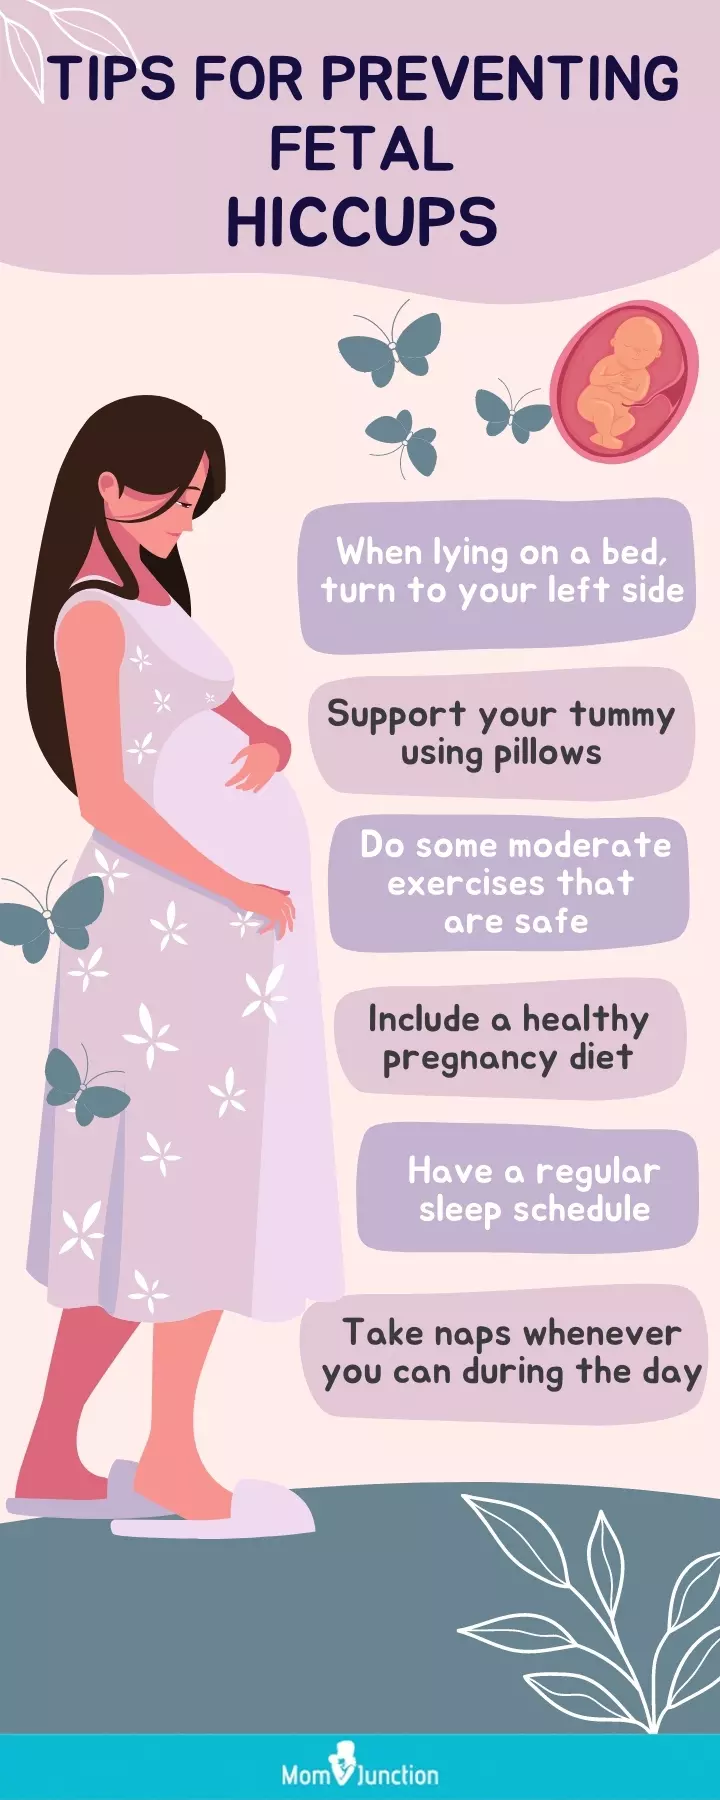 tips for preventing fetal hiccups (infographic)